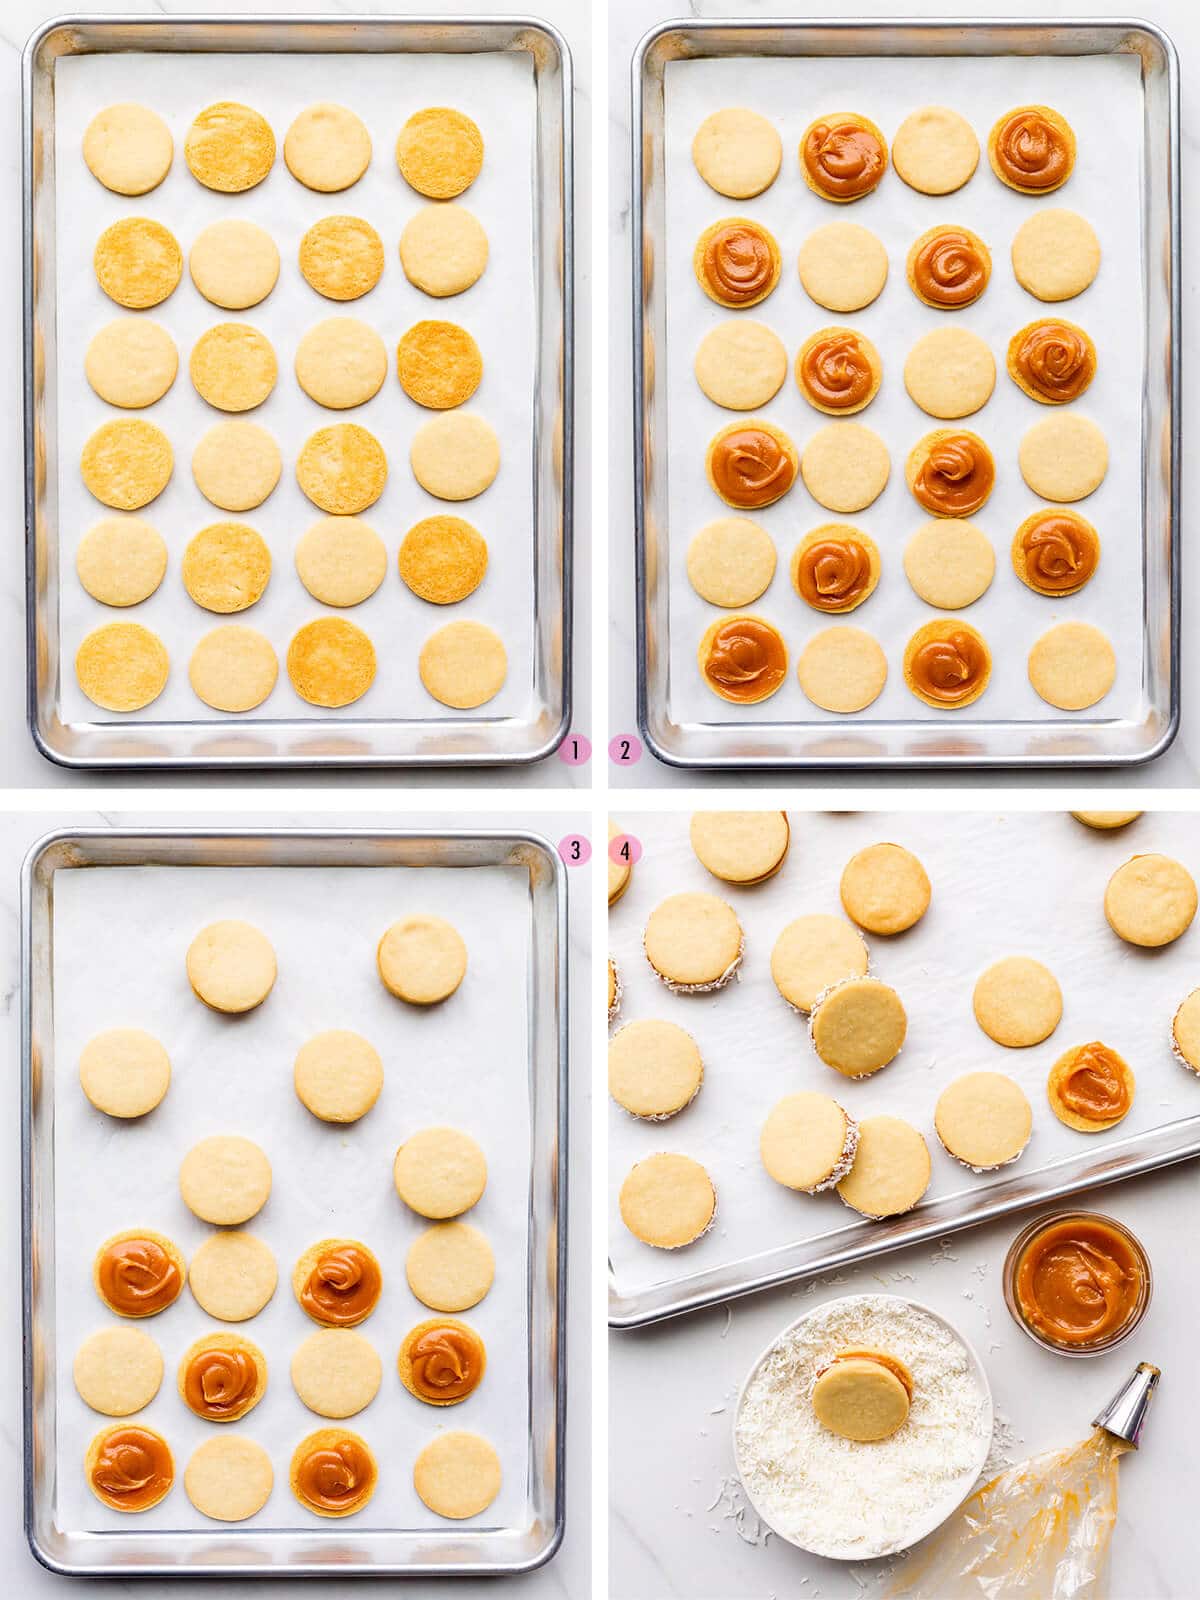 Collage of four images to show how to assemble alfajores cookies starting in image 1 with freshly baked shortbread cookie cutouts; image 2 shows half the cookies are topped with dulce de leche; image 3 shows how to sandwich the cookies; image 4 shows rolling the sandwich cookies in coconut to coat the edges.